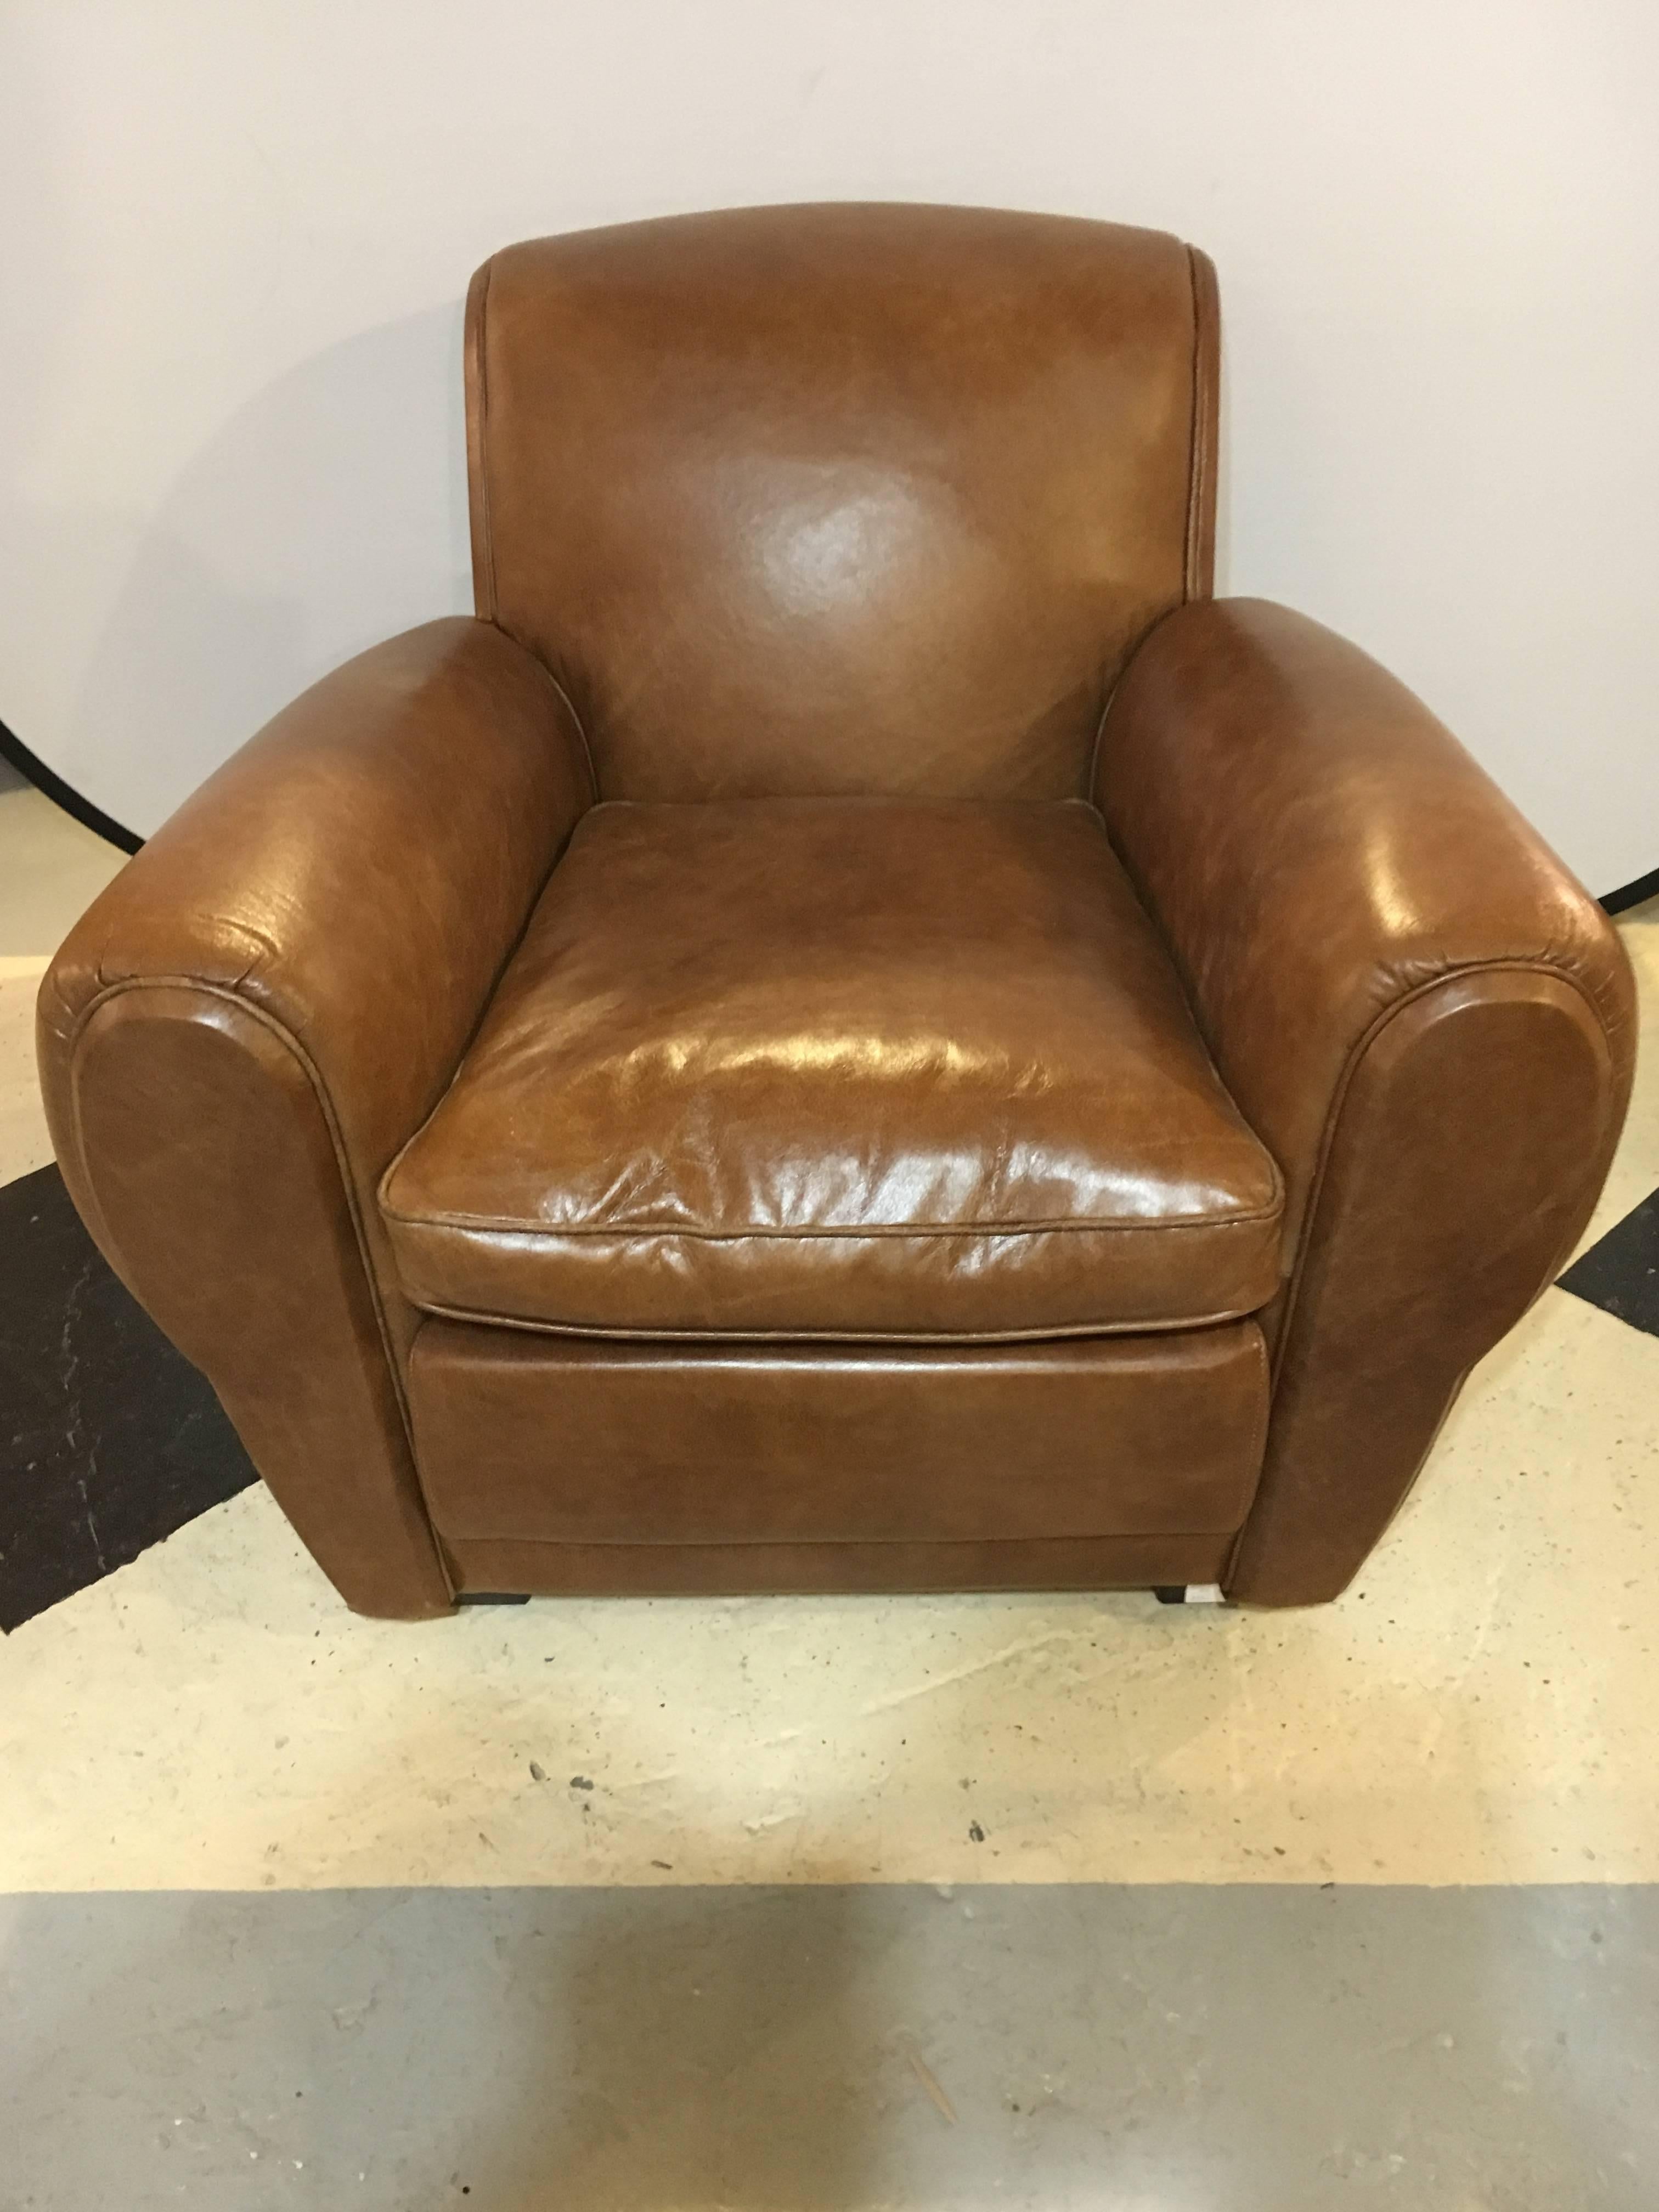 A pair of fine worn leather cabaret chairs. Each chair sitting on square bracket feet with burlap bottoms leading to a comfortable and easy lounge chair of worn brown leather with wide sitting areas. We have two pair of these chairs available. Price